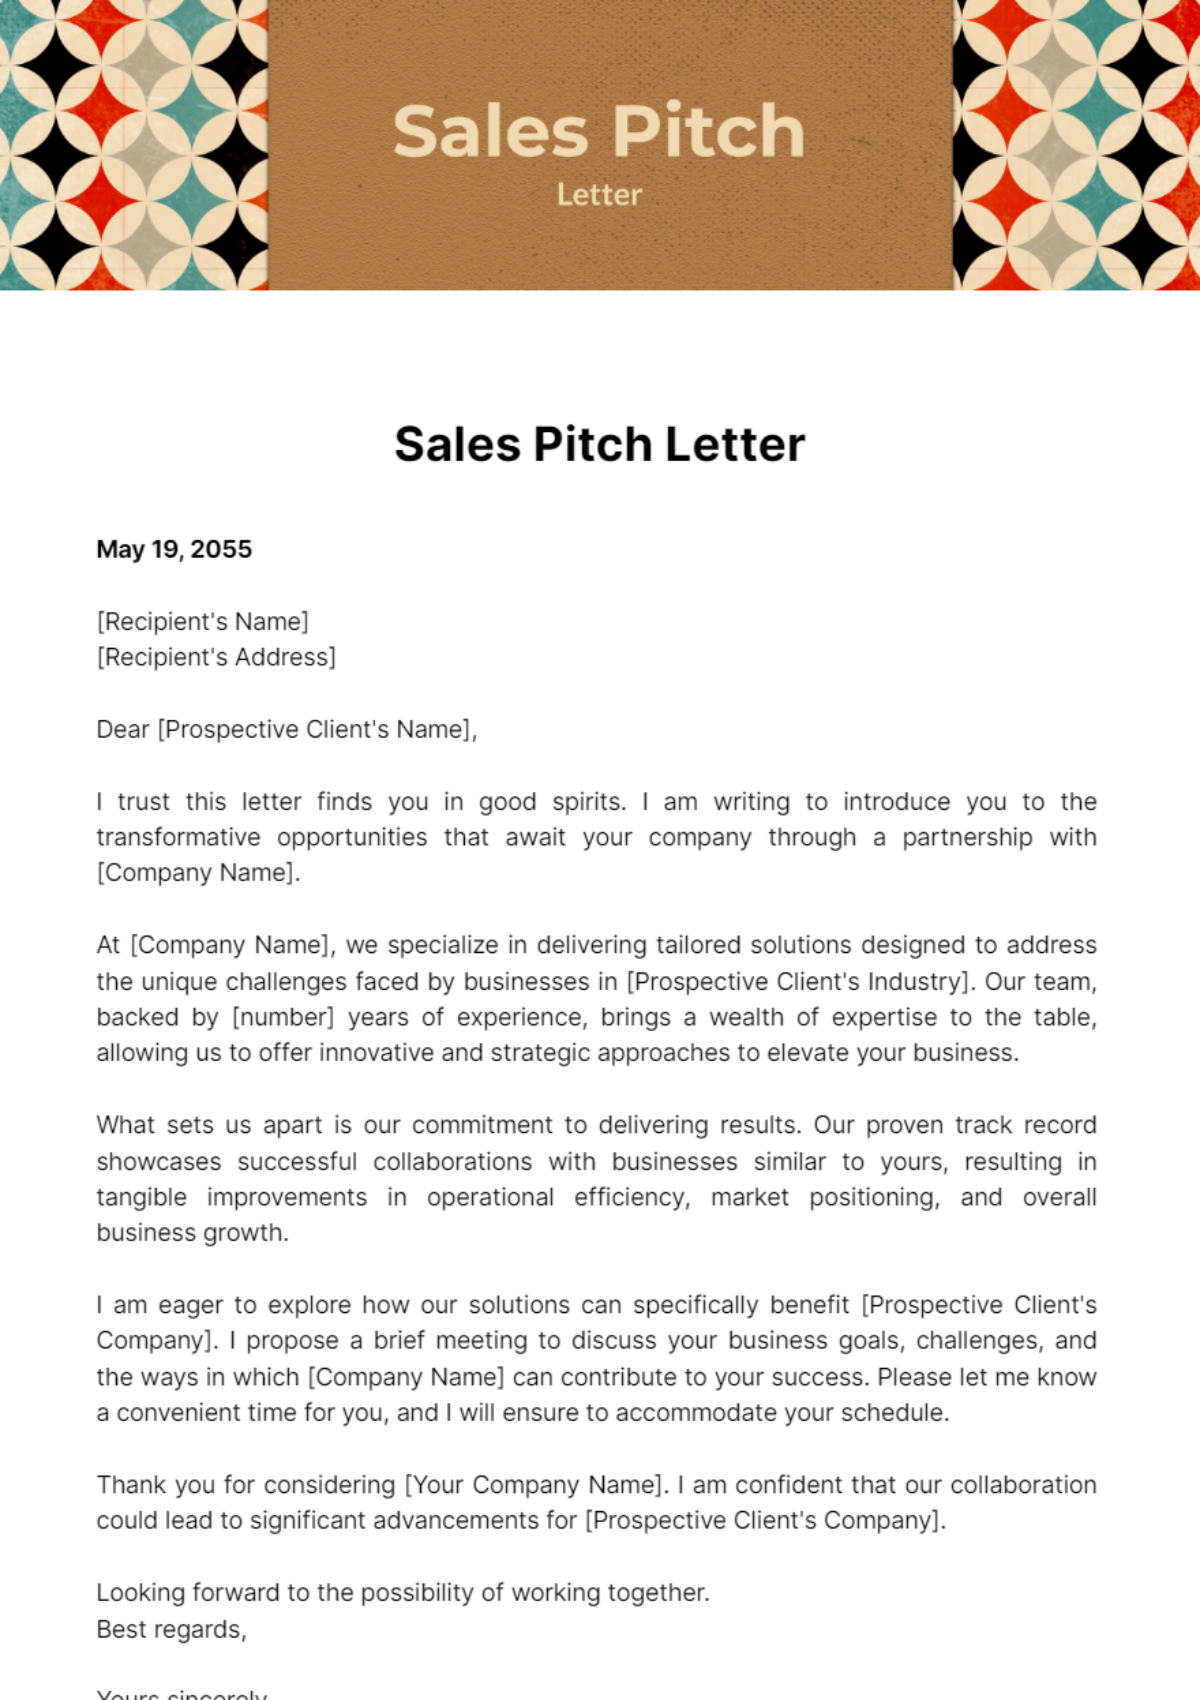 Free Sales Pitch Letter Template